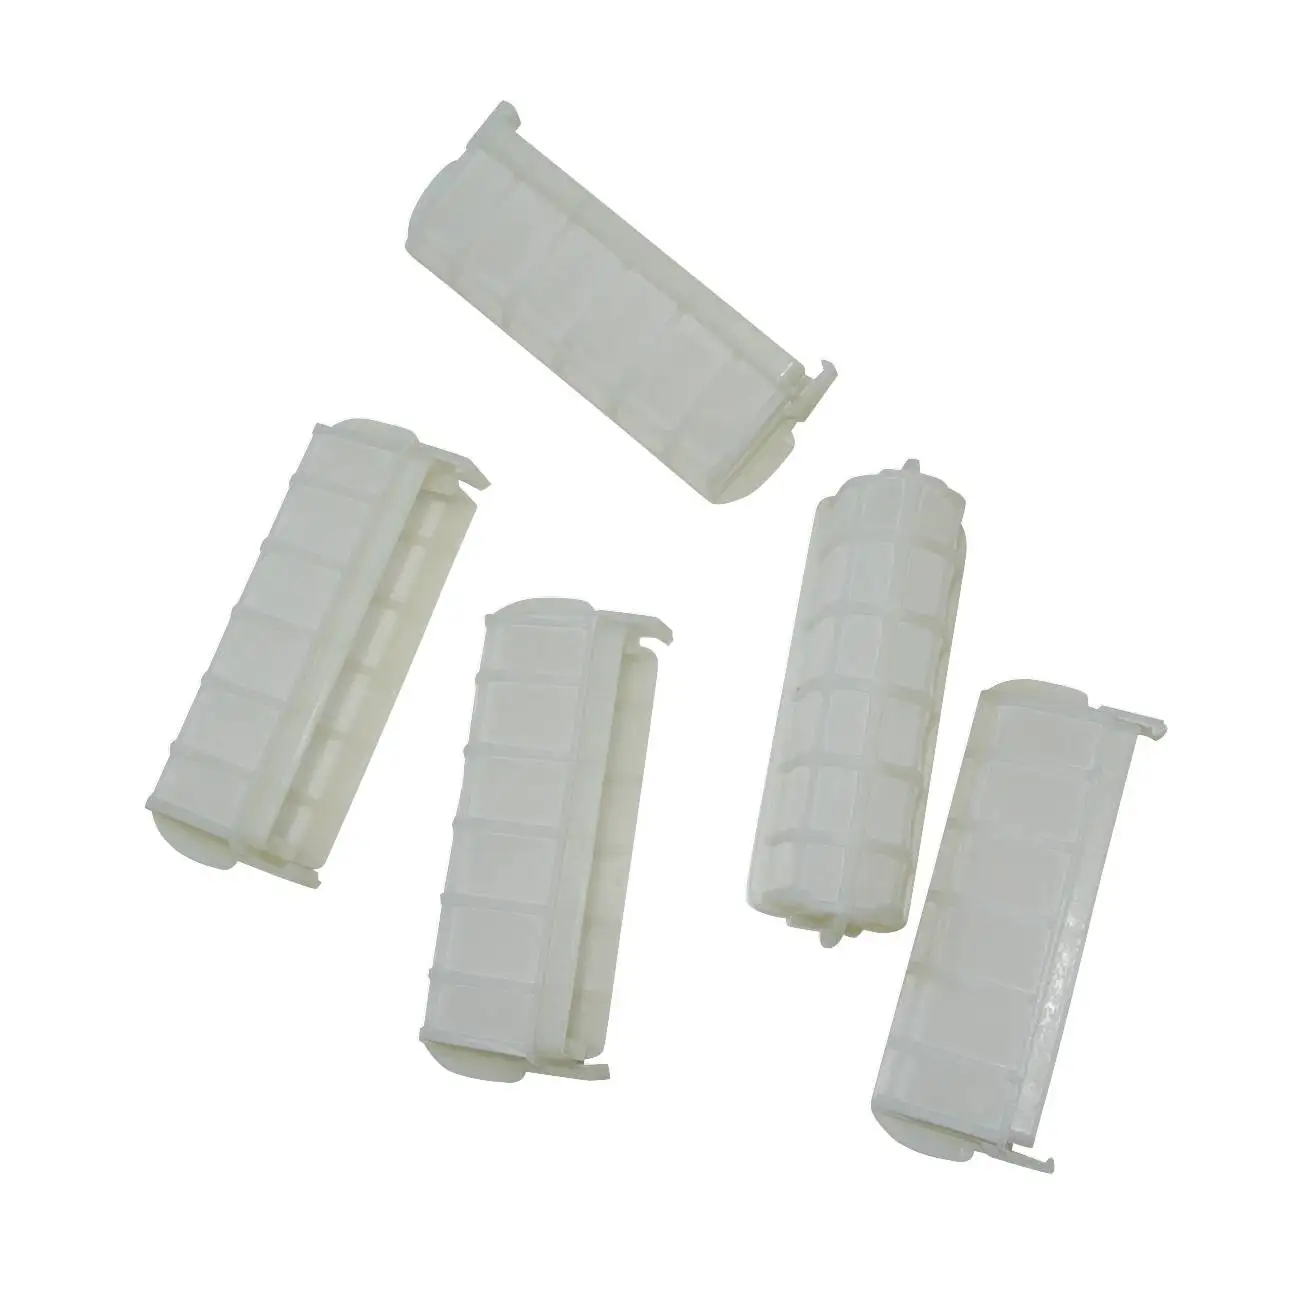 5Pcs Air Filter For Stihl 021,023,025,MS210,MS230,MS250 Chainsaw Replace NEW Parts